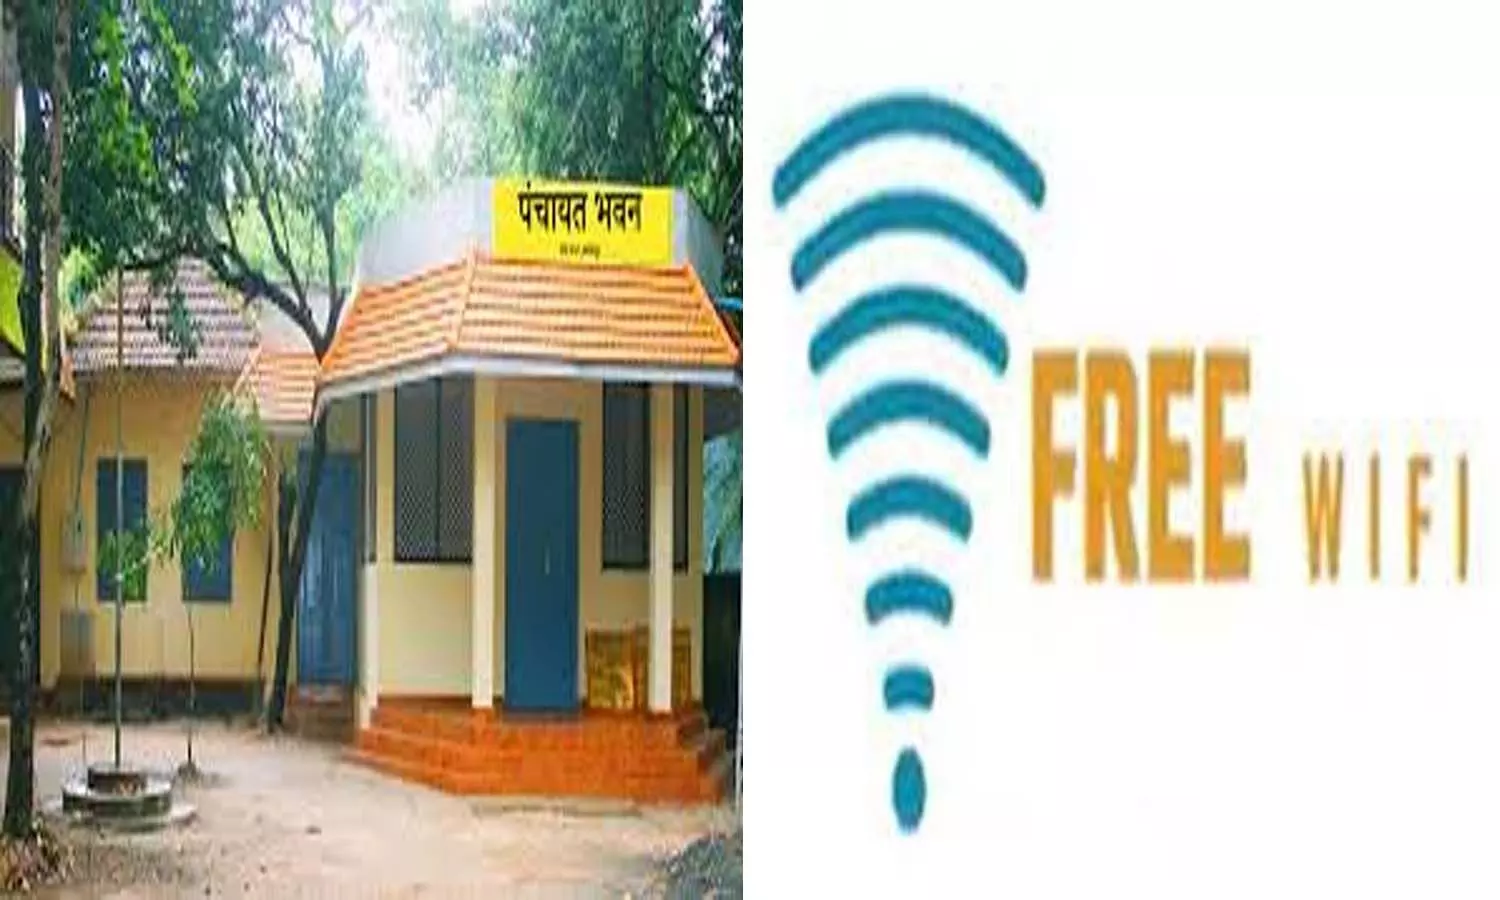 Free Wi-Fi will be available within 50 meters of Village Secretariat building, villages will become smart